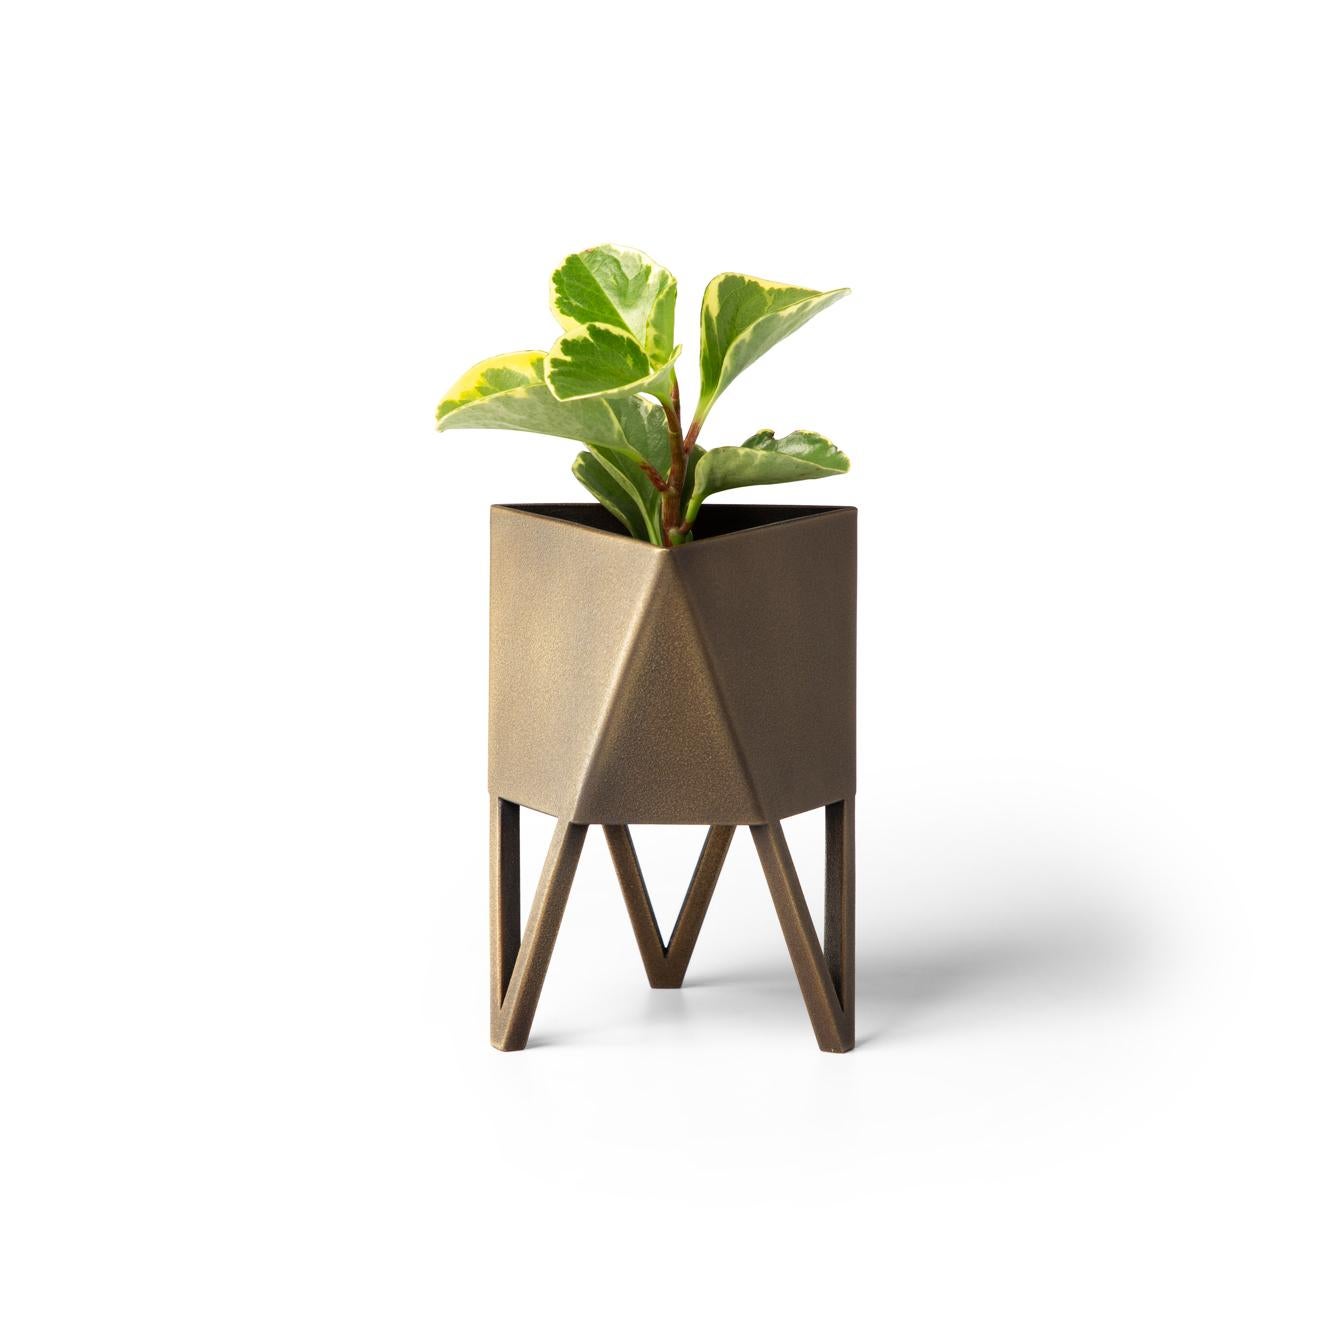 Deca Planter in Mineral By Force/Collide, Size Small, 2023 For Sale 9